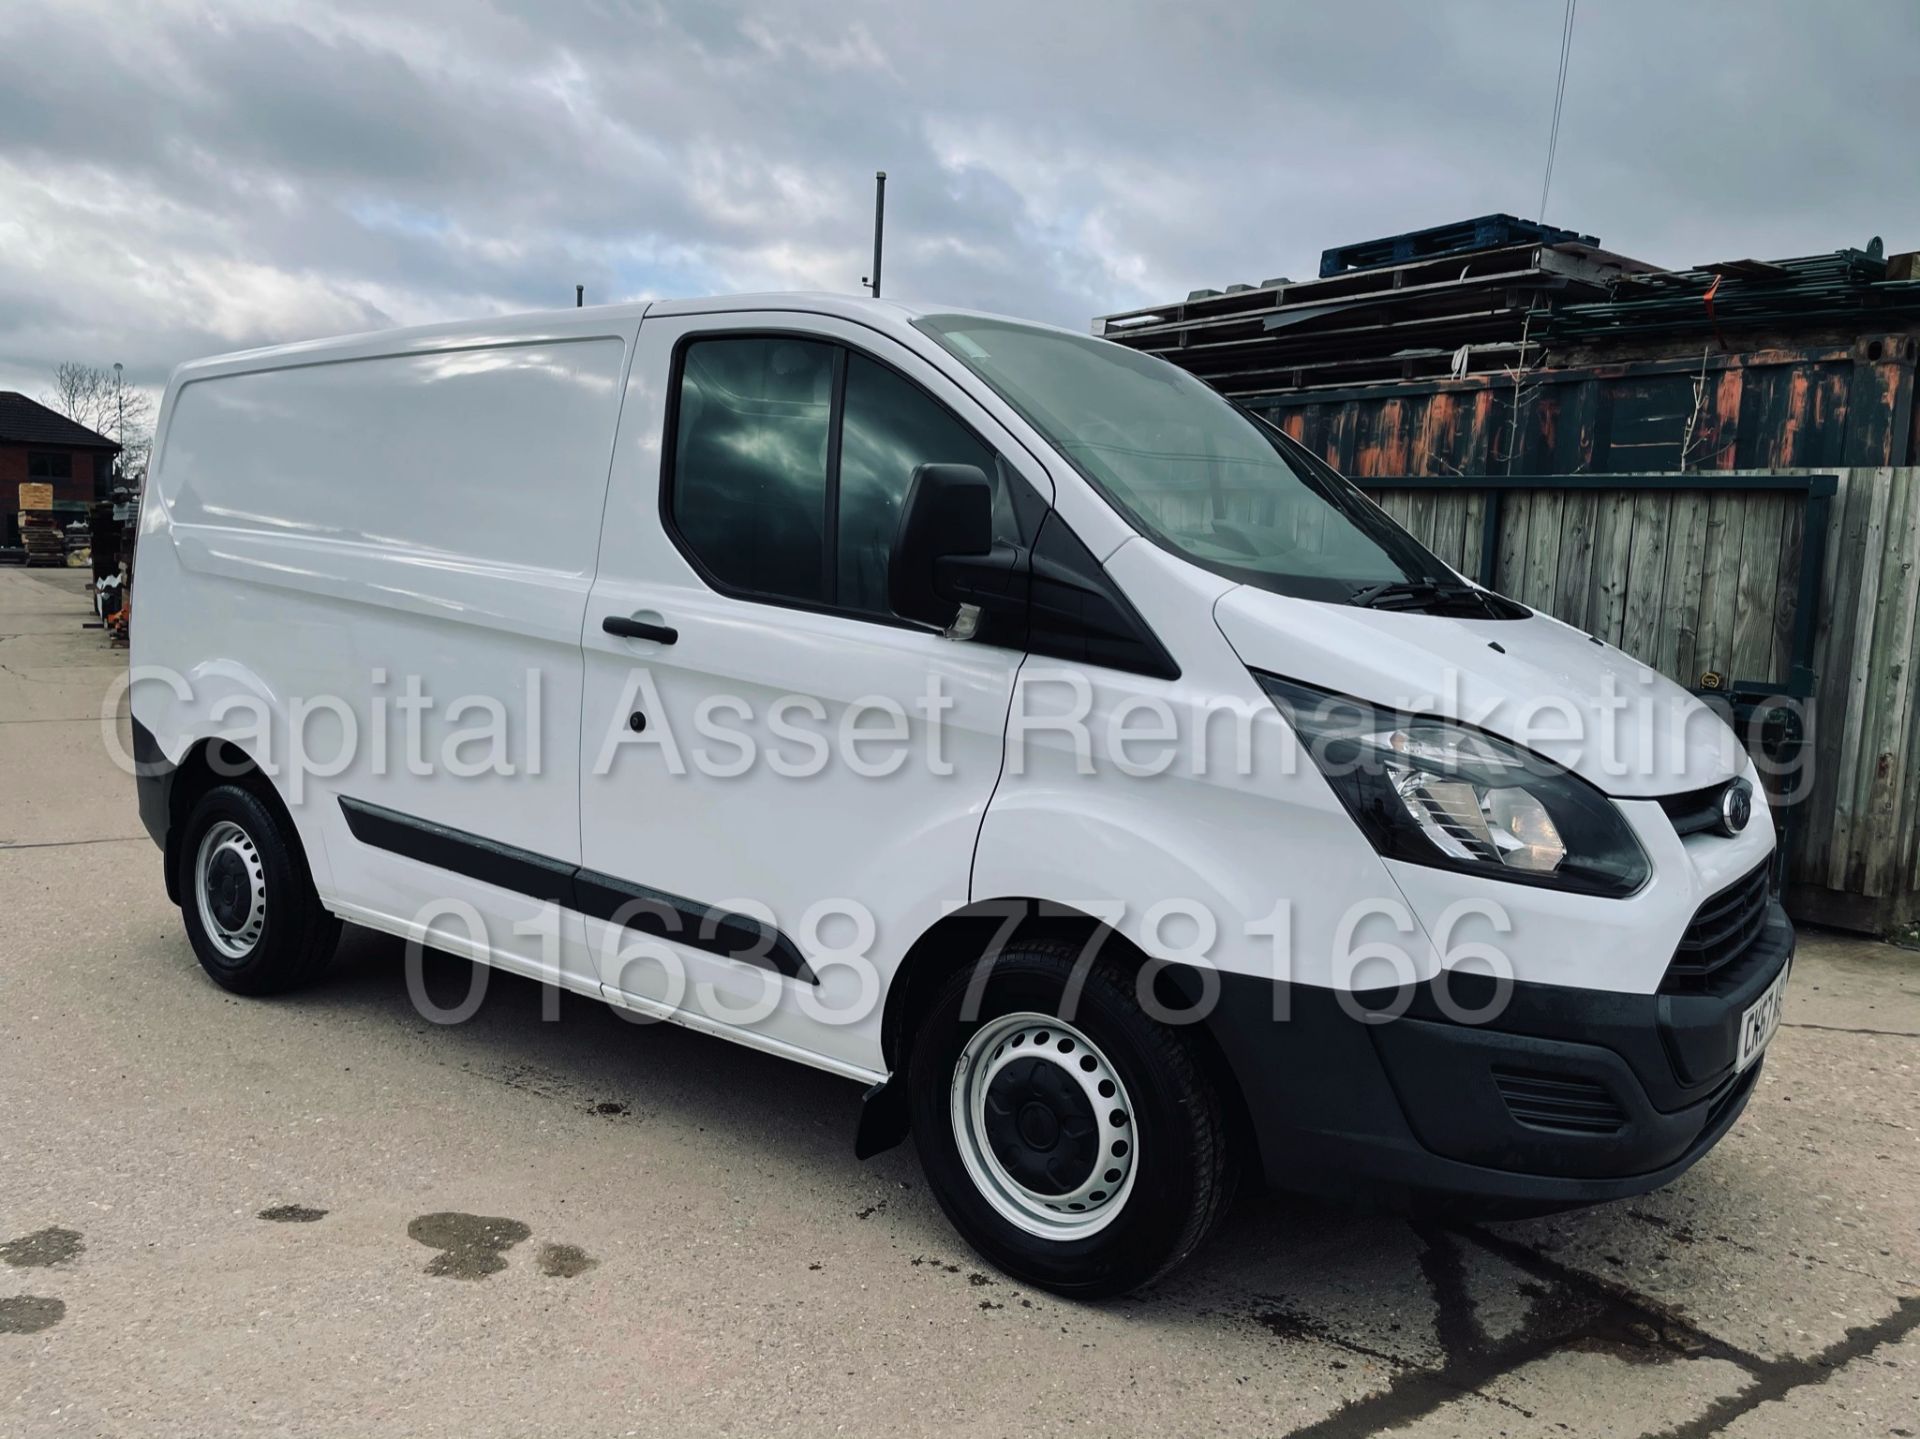 FORD TRANSIT CUSTOM 270 *SWB - PANEL VAN* (2018 - EURO 6) '2.0 TDCI - 6 SPEED' (1 OWNER FROM NEW) - Image 2 of 37